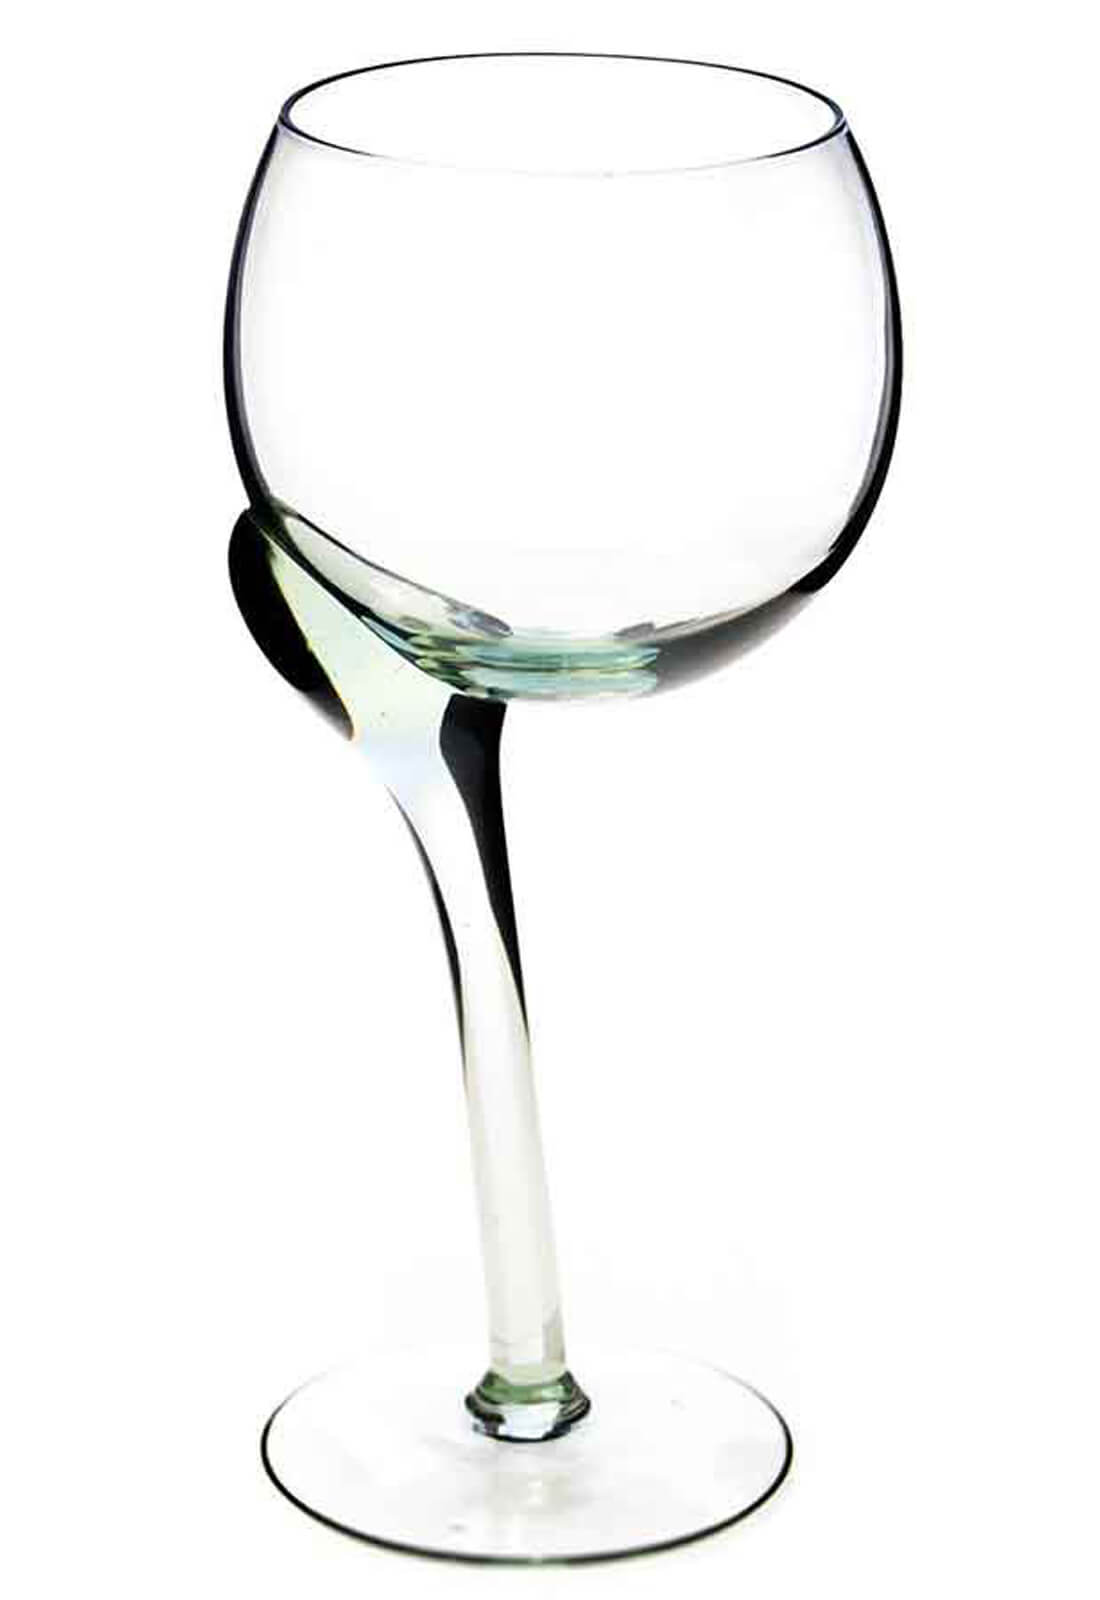 Crooked red wine glass, made of recycled glass with an olive green tint 